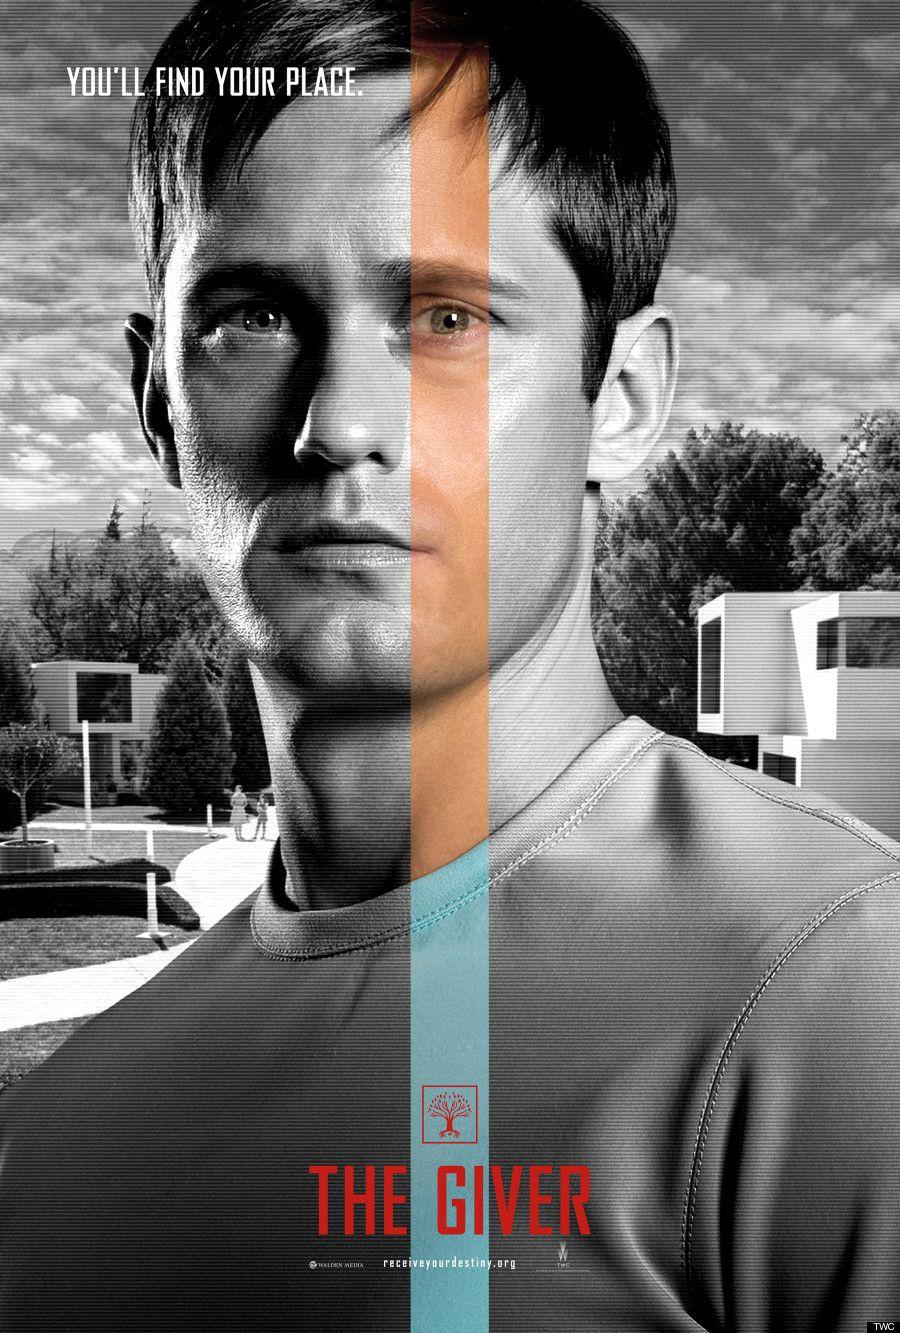 1240x2038px The Giver 514.59 KB